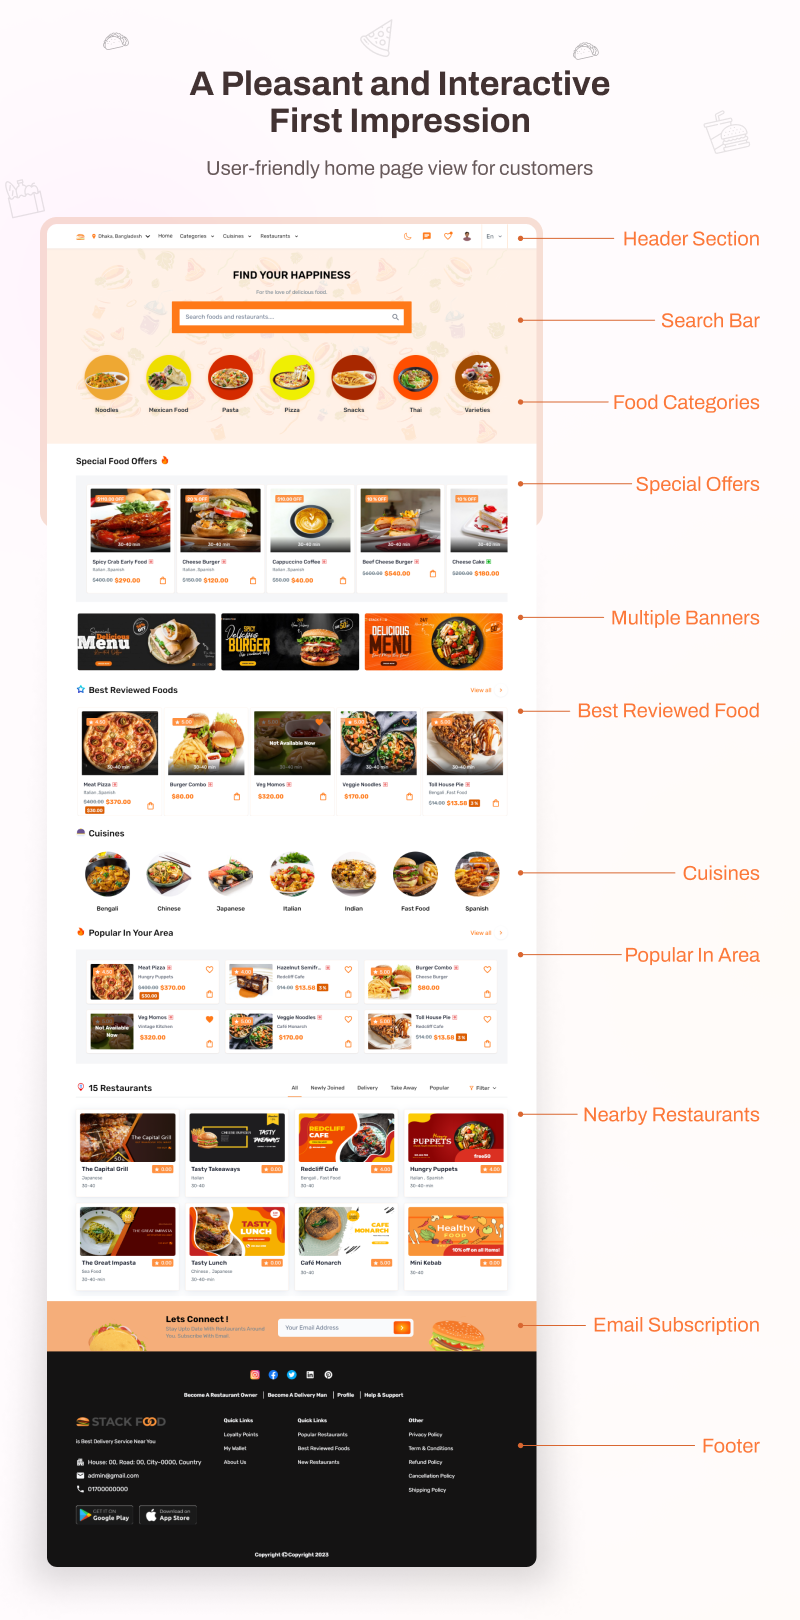 StackFood multi restaurant food delivery solution